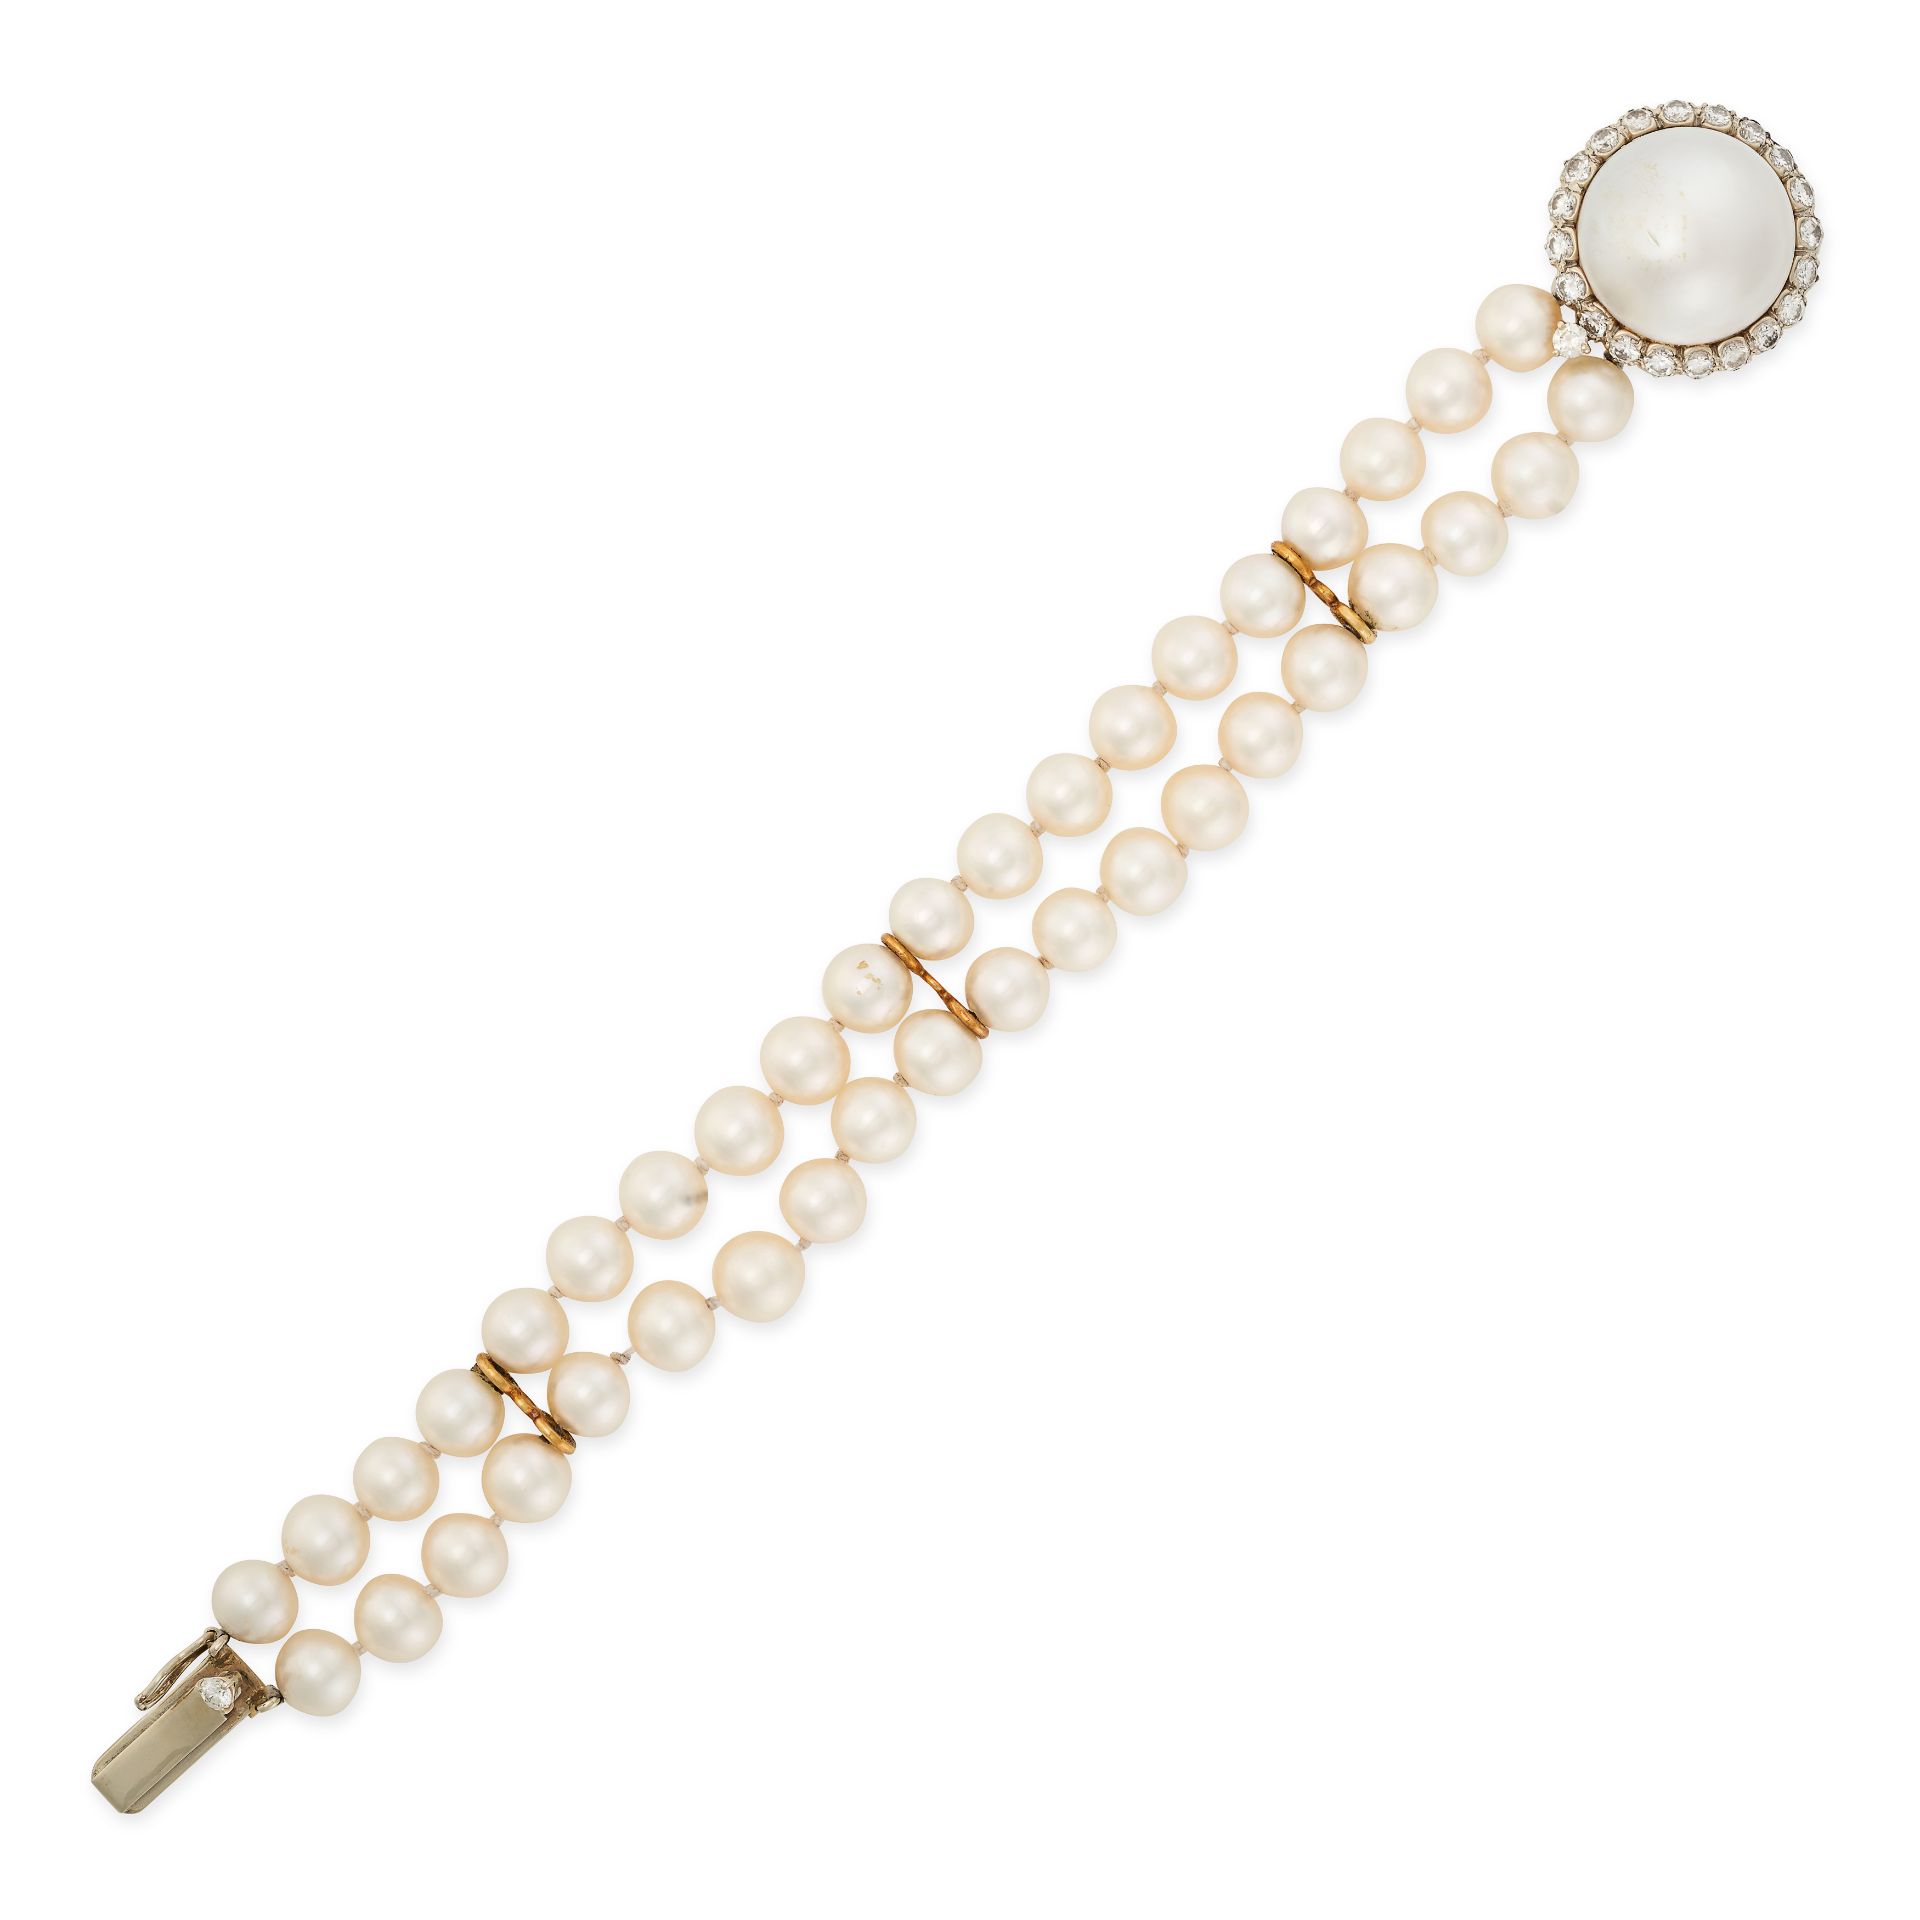 A PEARL AND DIAMOND BRACELET comprising two rows of pearls, the clasp set with a mabe pearl of 18.